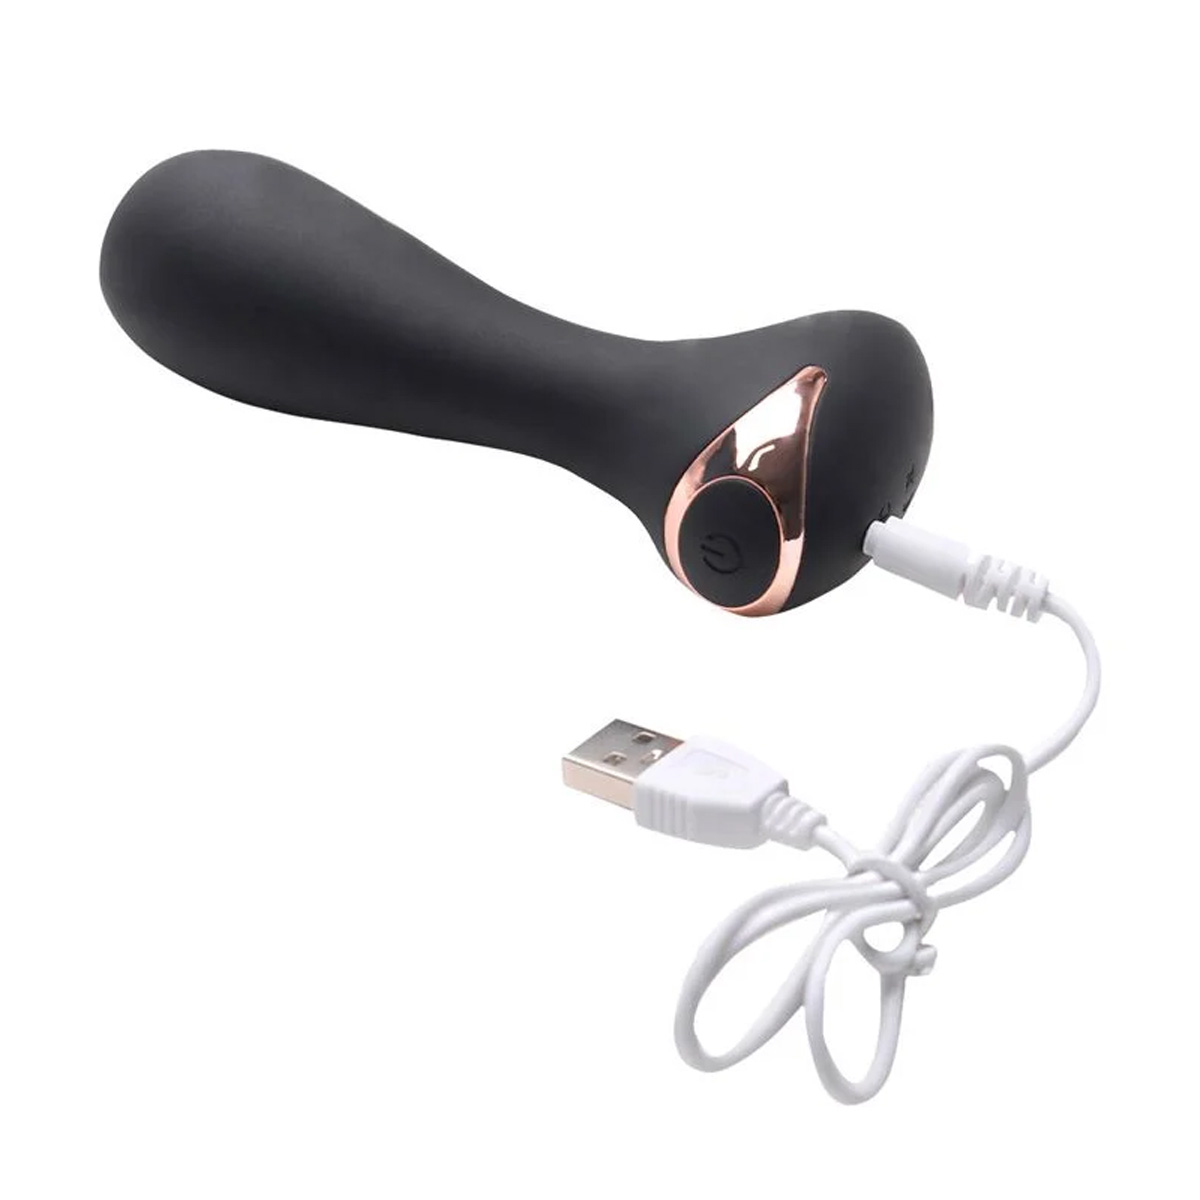 USB rechargeable we Love anal plug vibrator sex toy